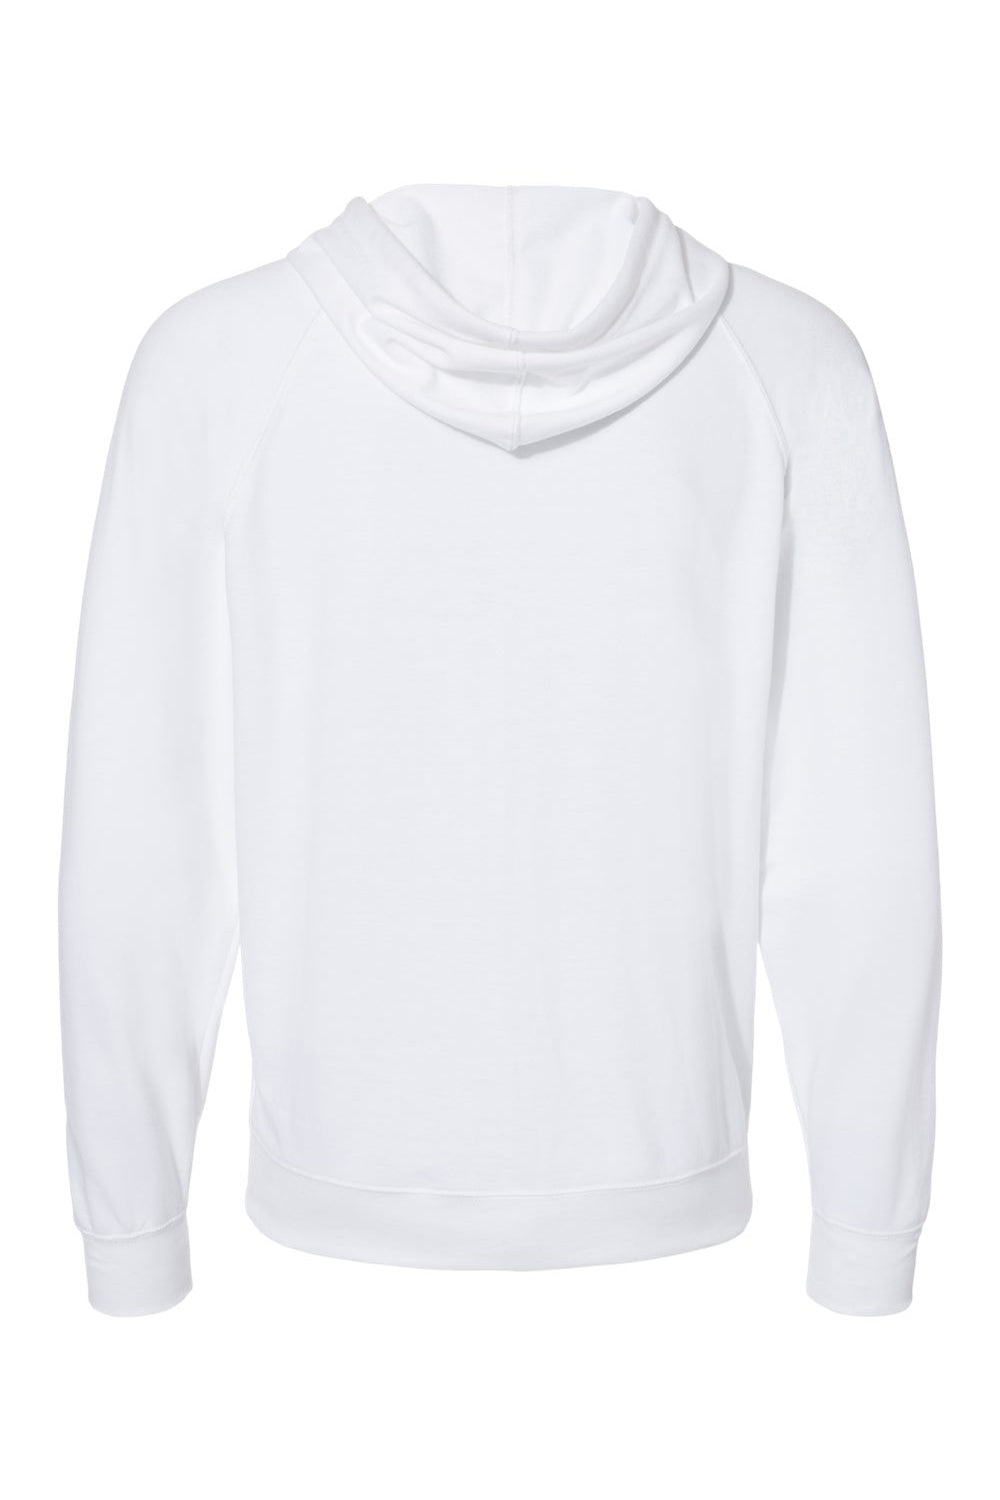 Independent Trading Co. SS1000Z Mens Icon Loopback Terry Full Zip Hooded Sweatshirt Hoodie White Flat Back